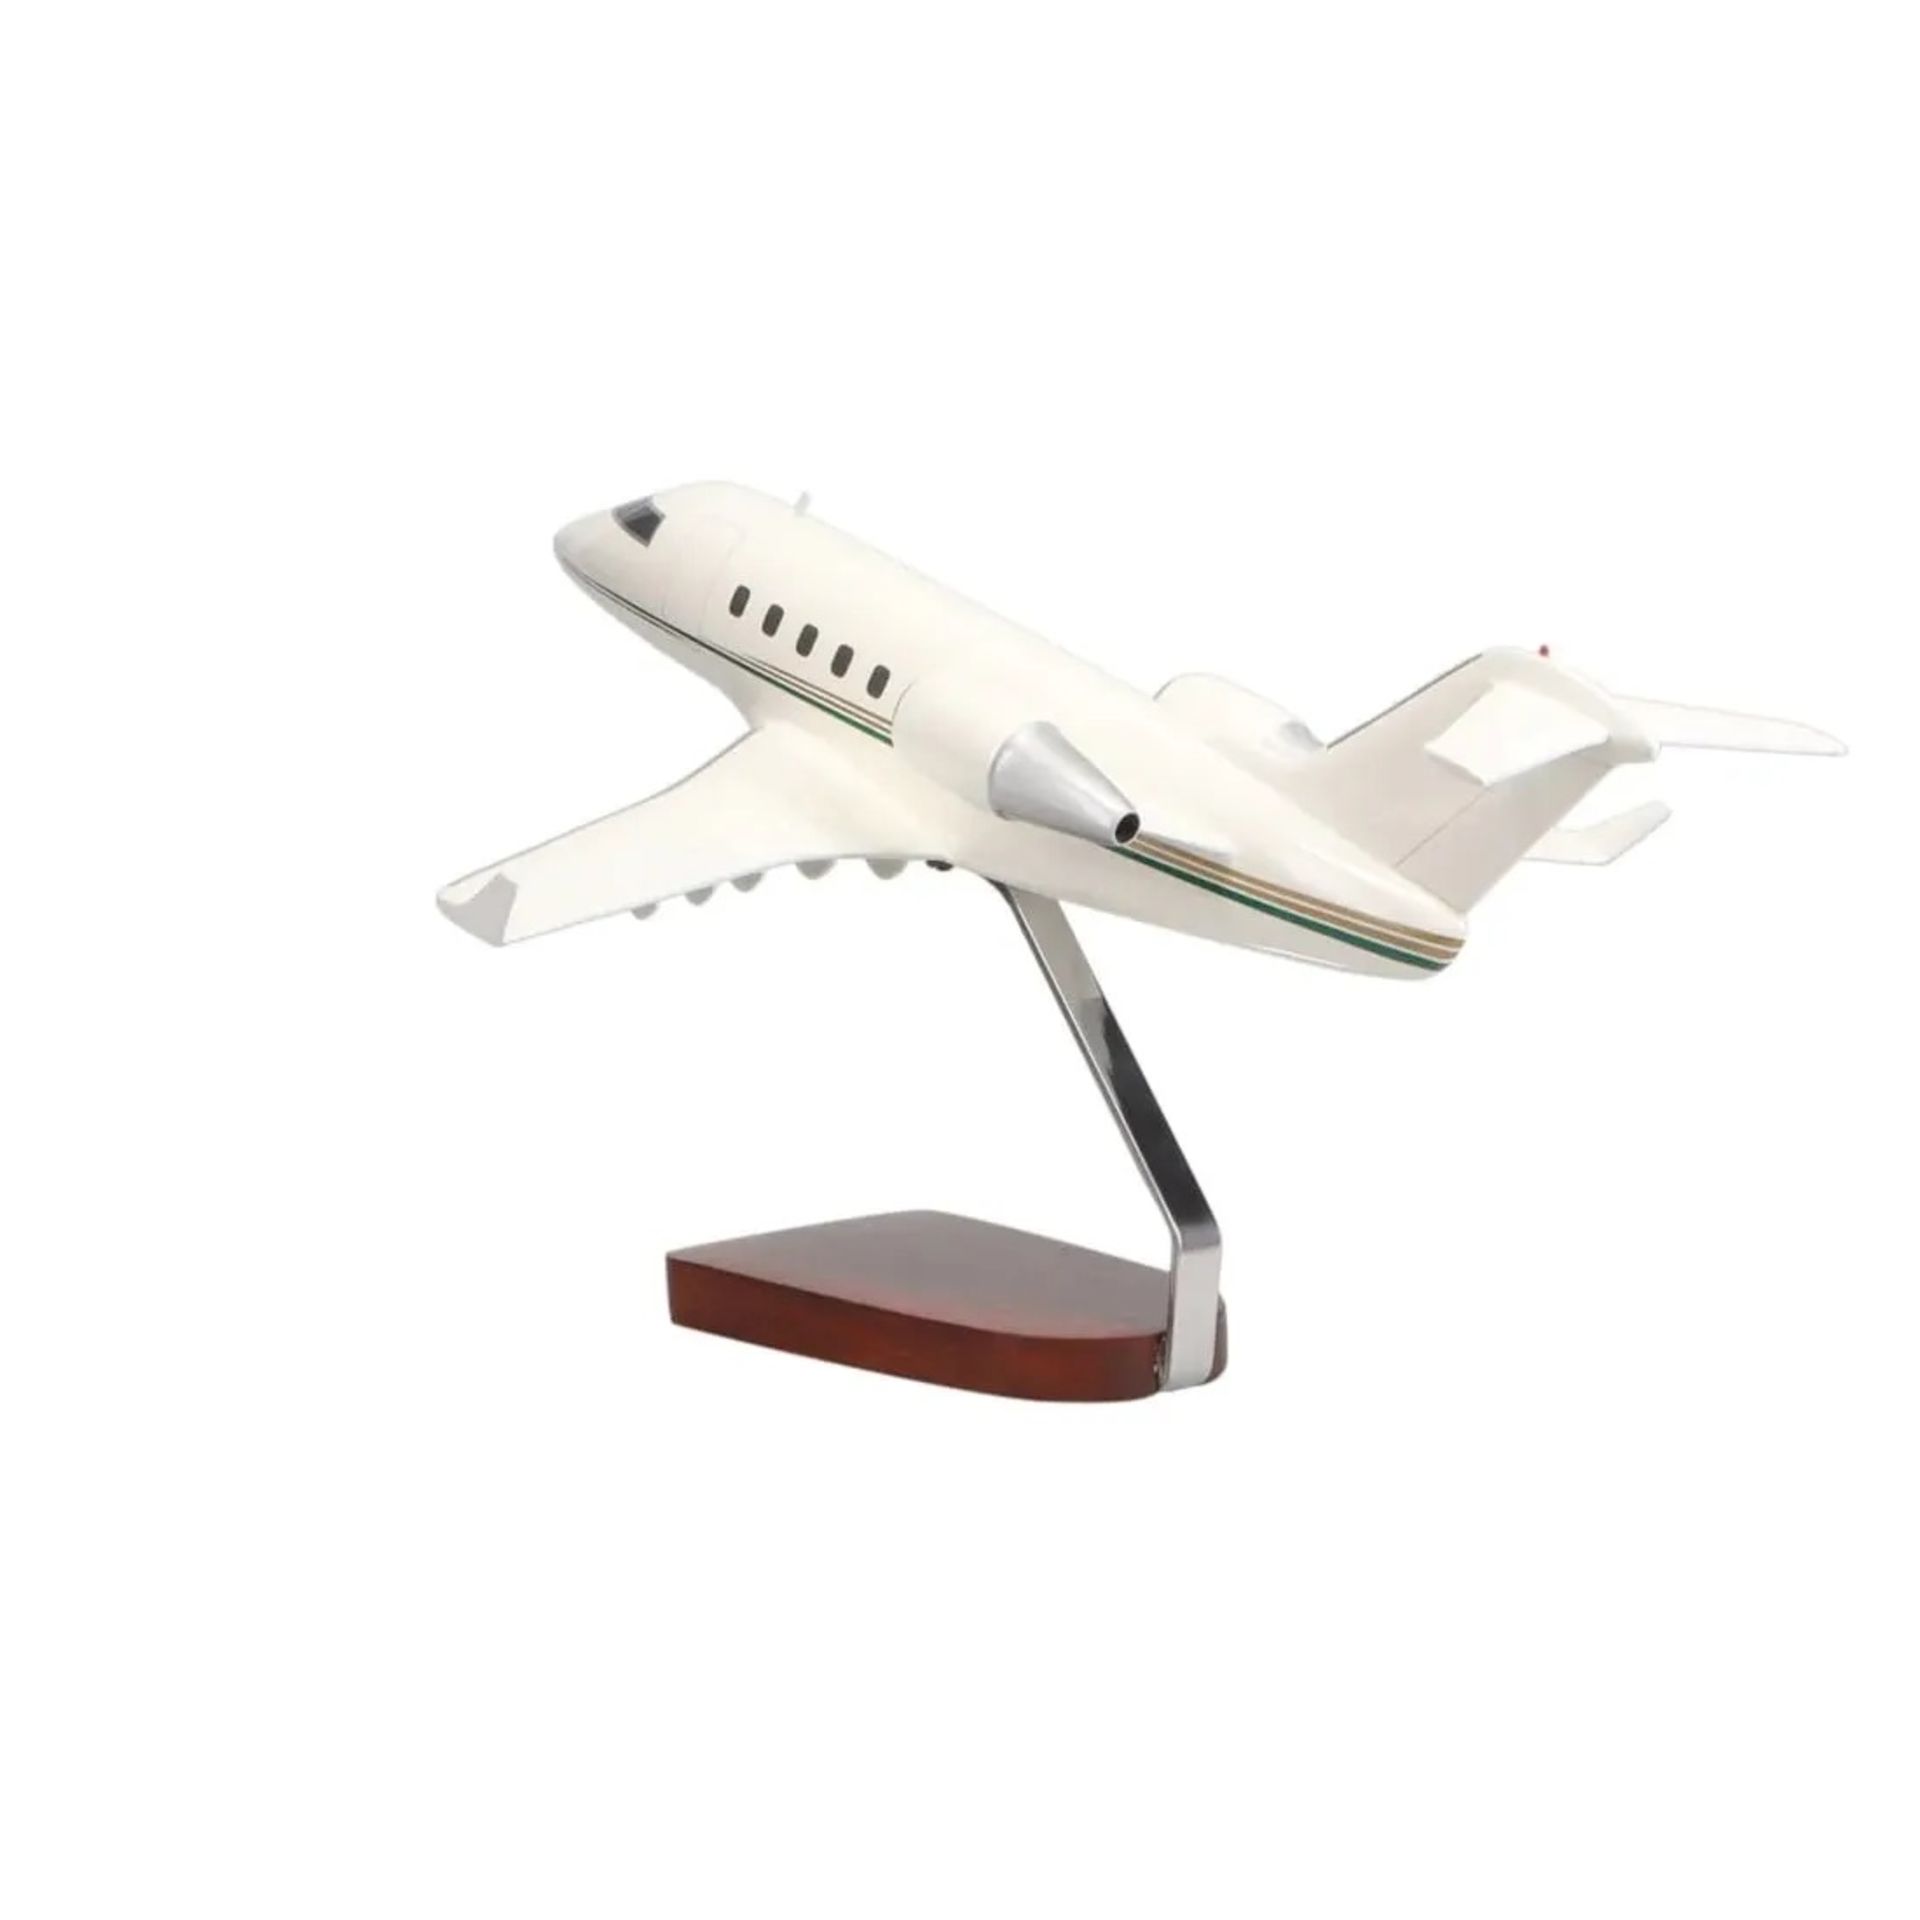 Bombardier Challenger 601 Scale Model - Image 3 of 4